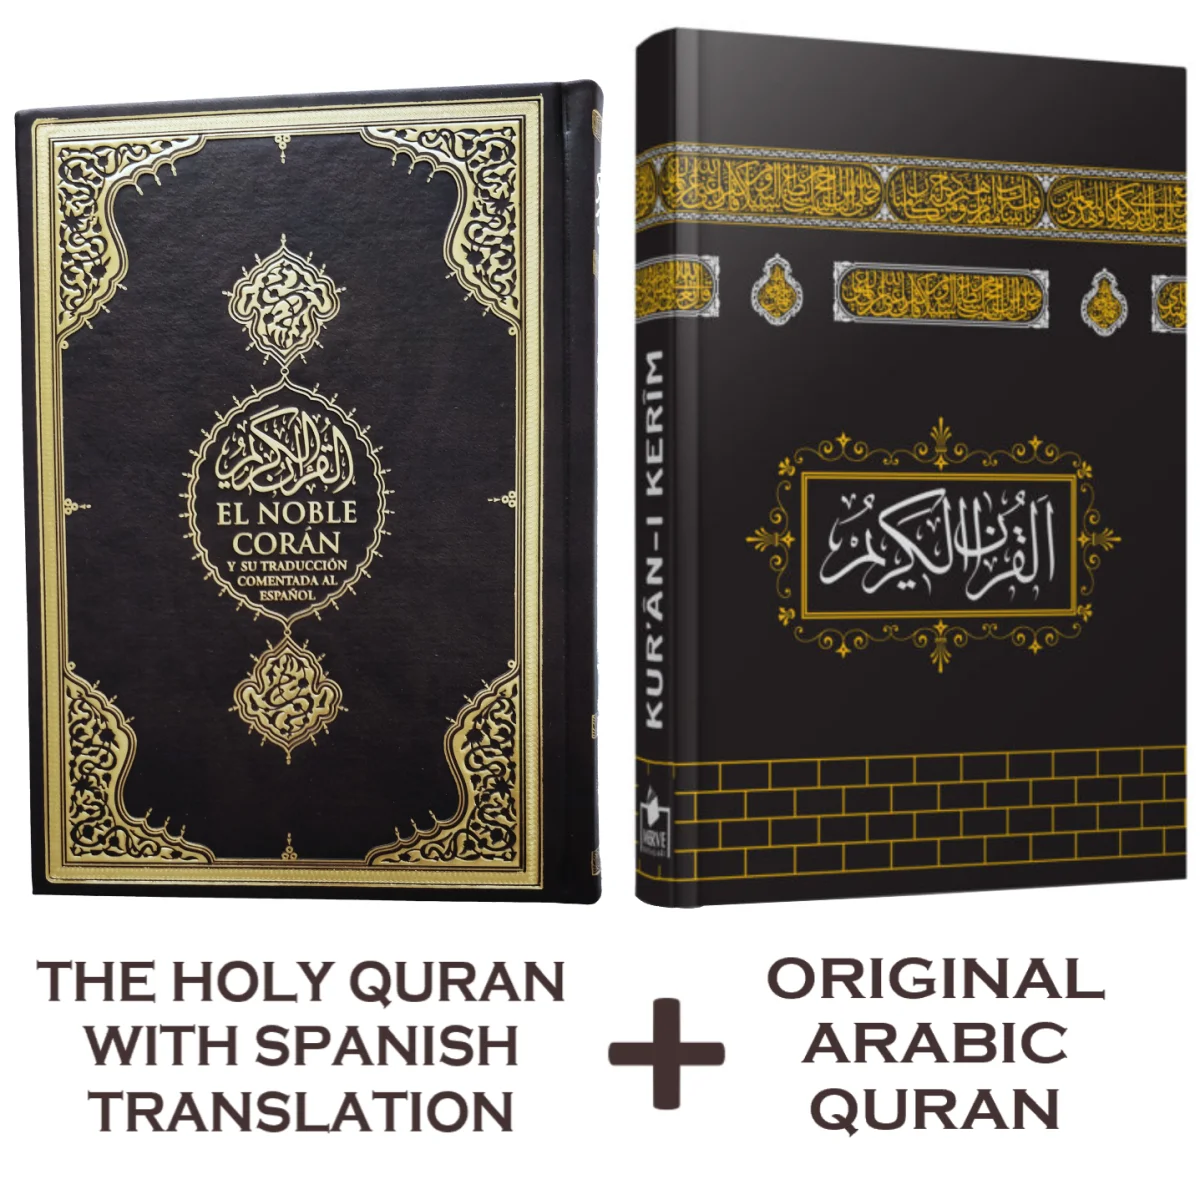 The Kaaba Design Holy Quran + Spanish Translation of Qur'an Two Quran Books Set Hardcover Quality Page Noble Coran Libro Islamic